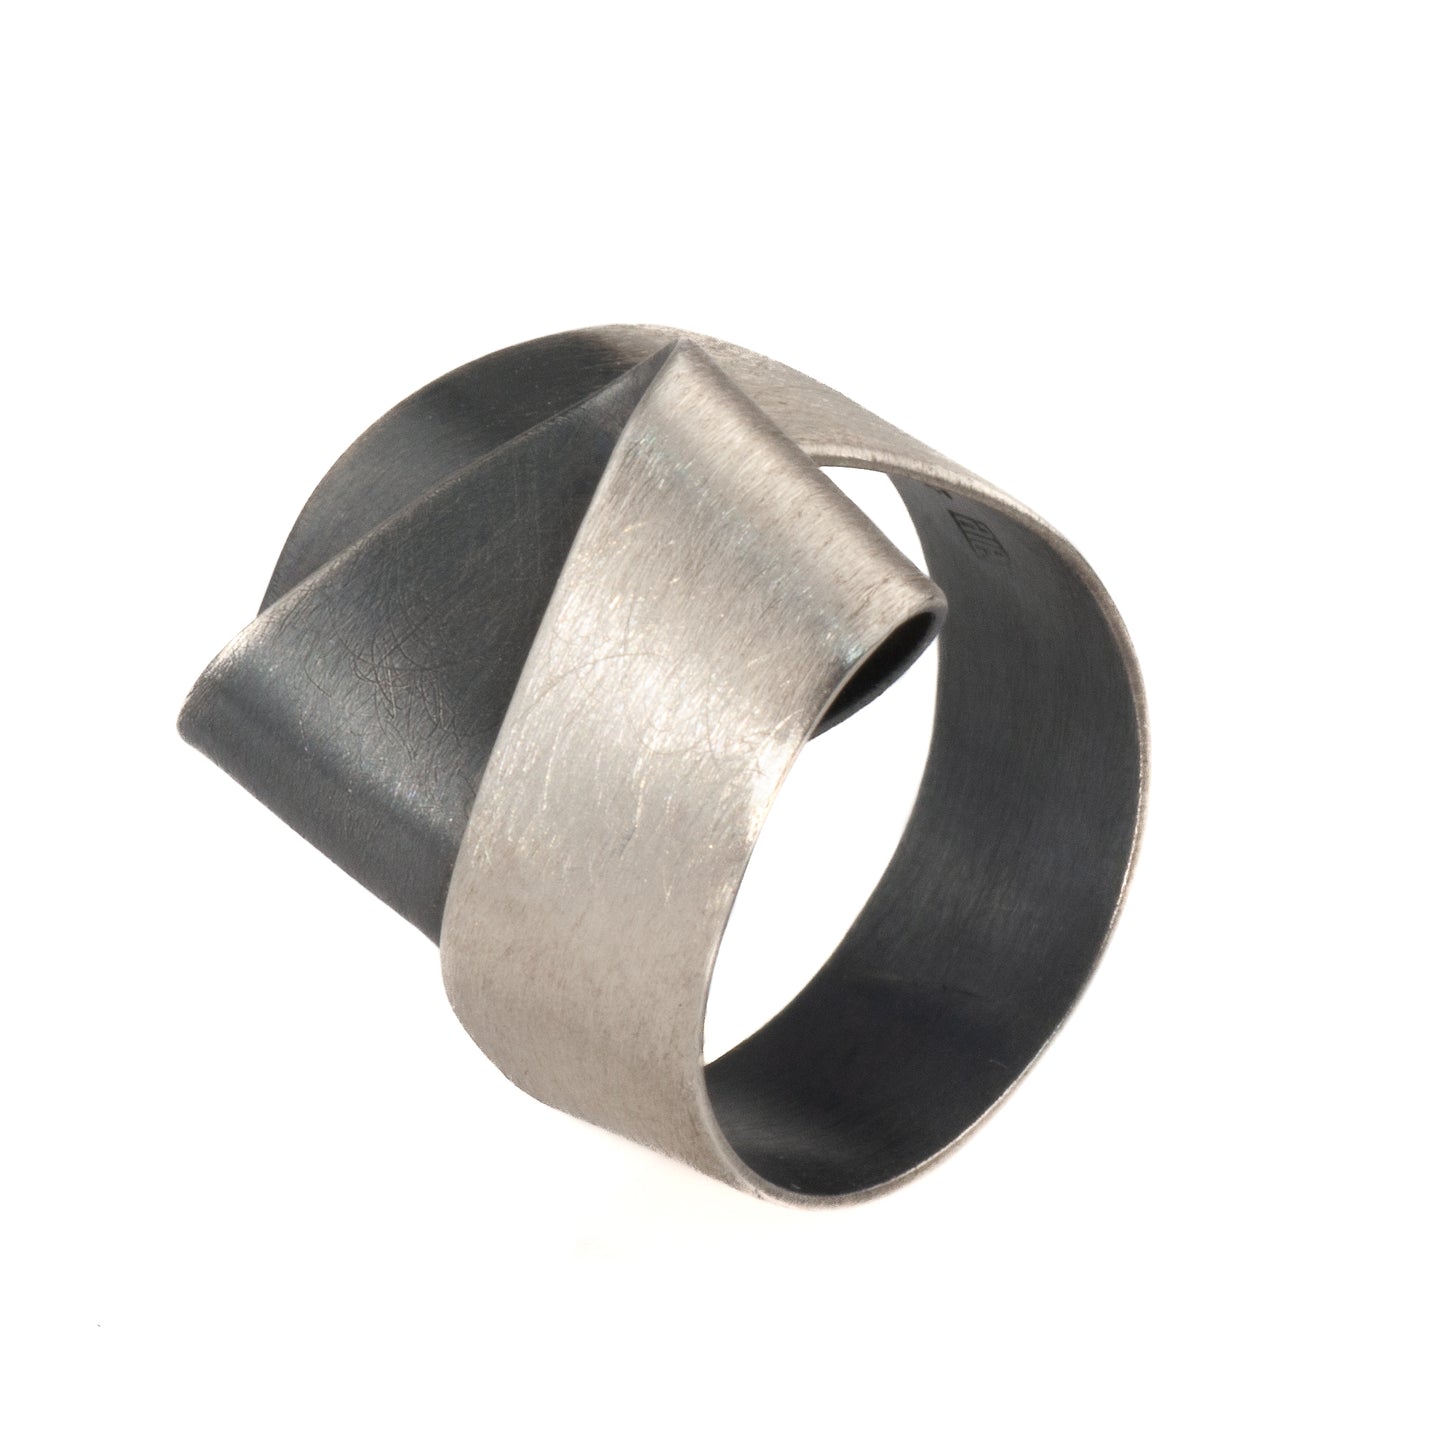 Mysterium Collection "Double Fold" Ring